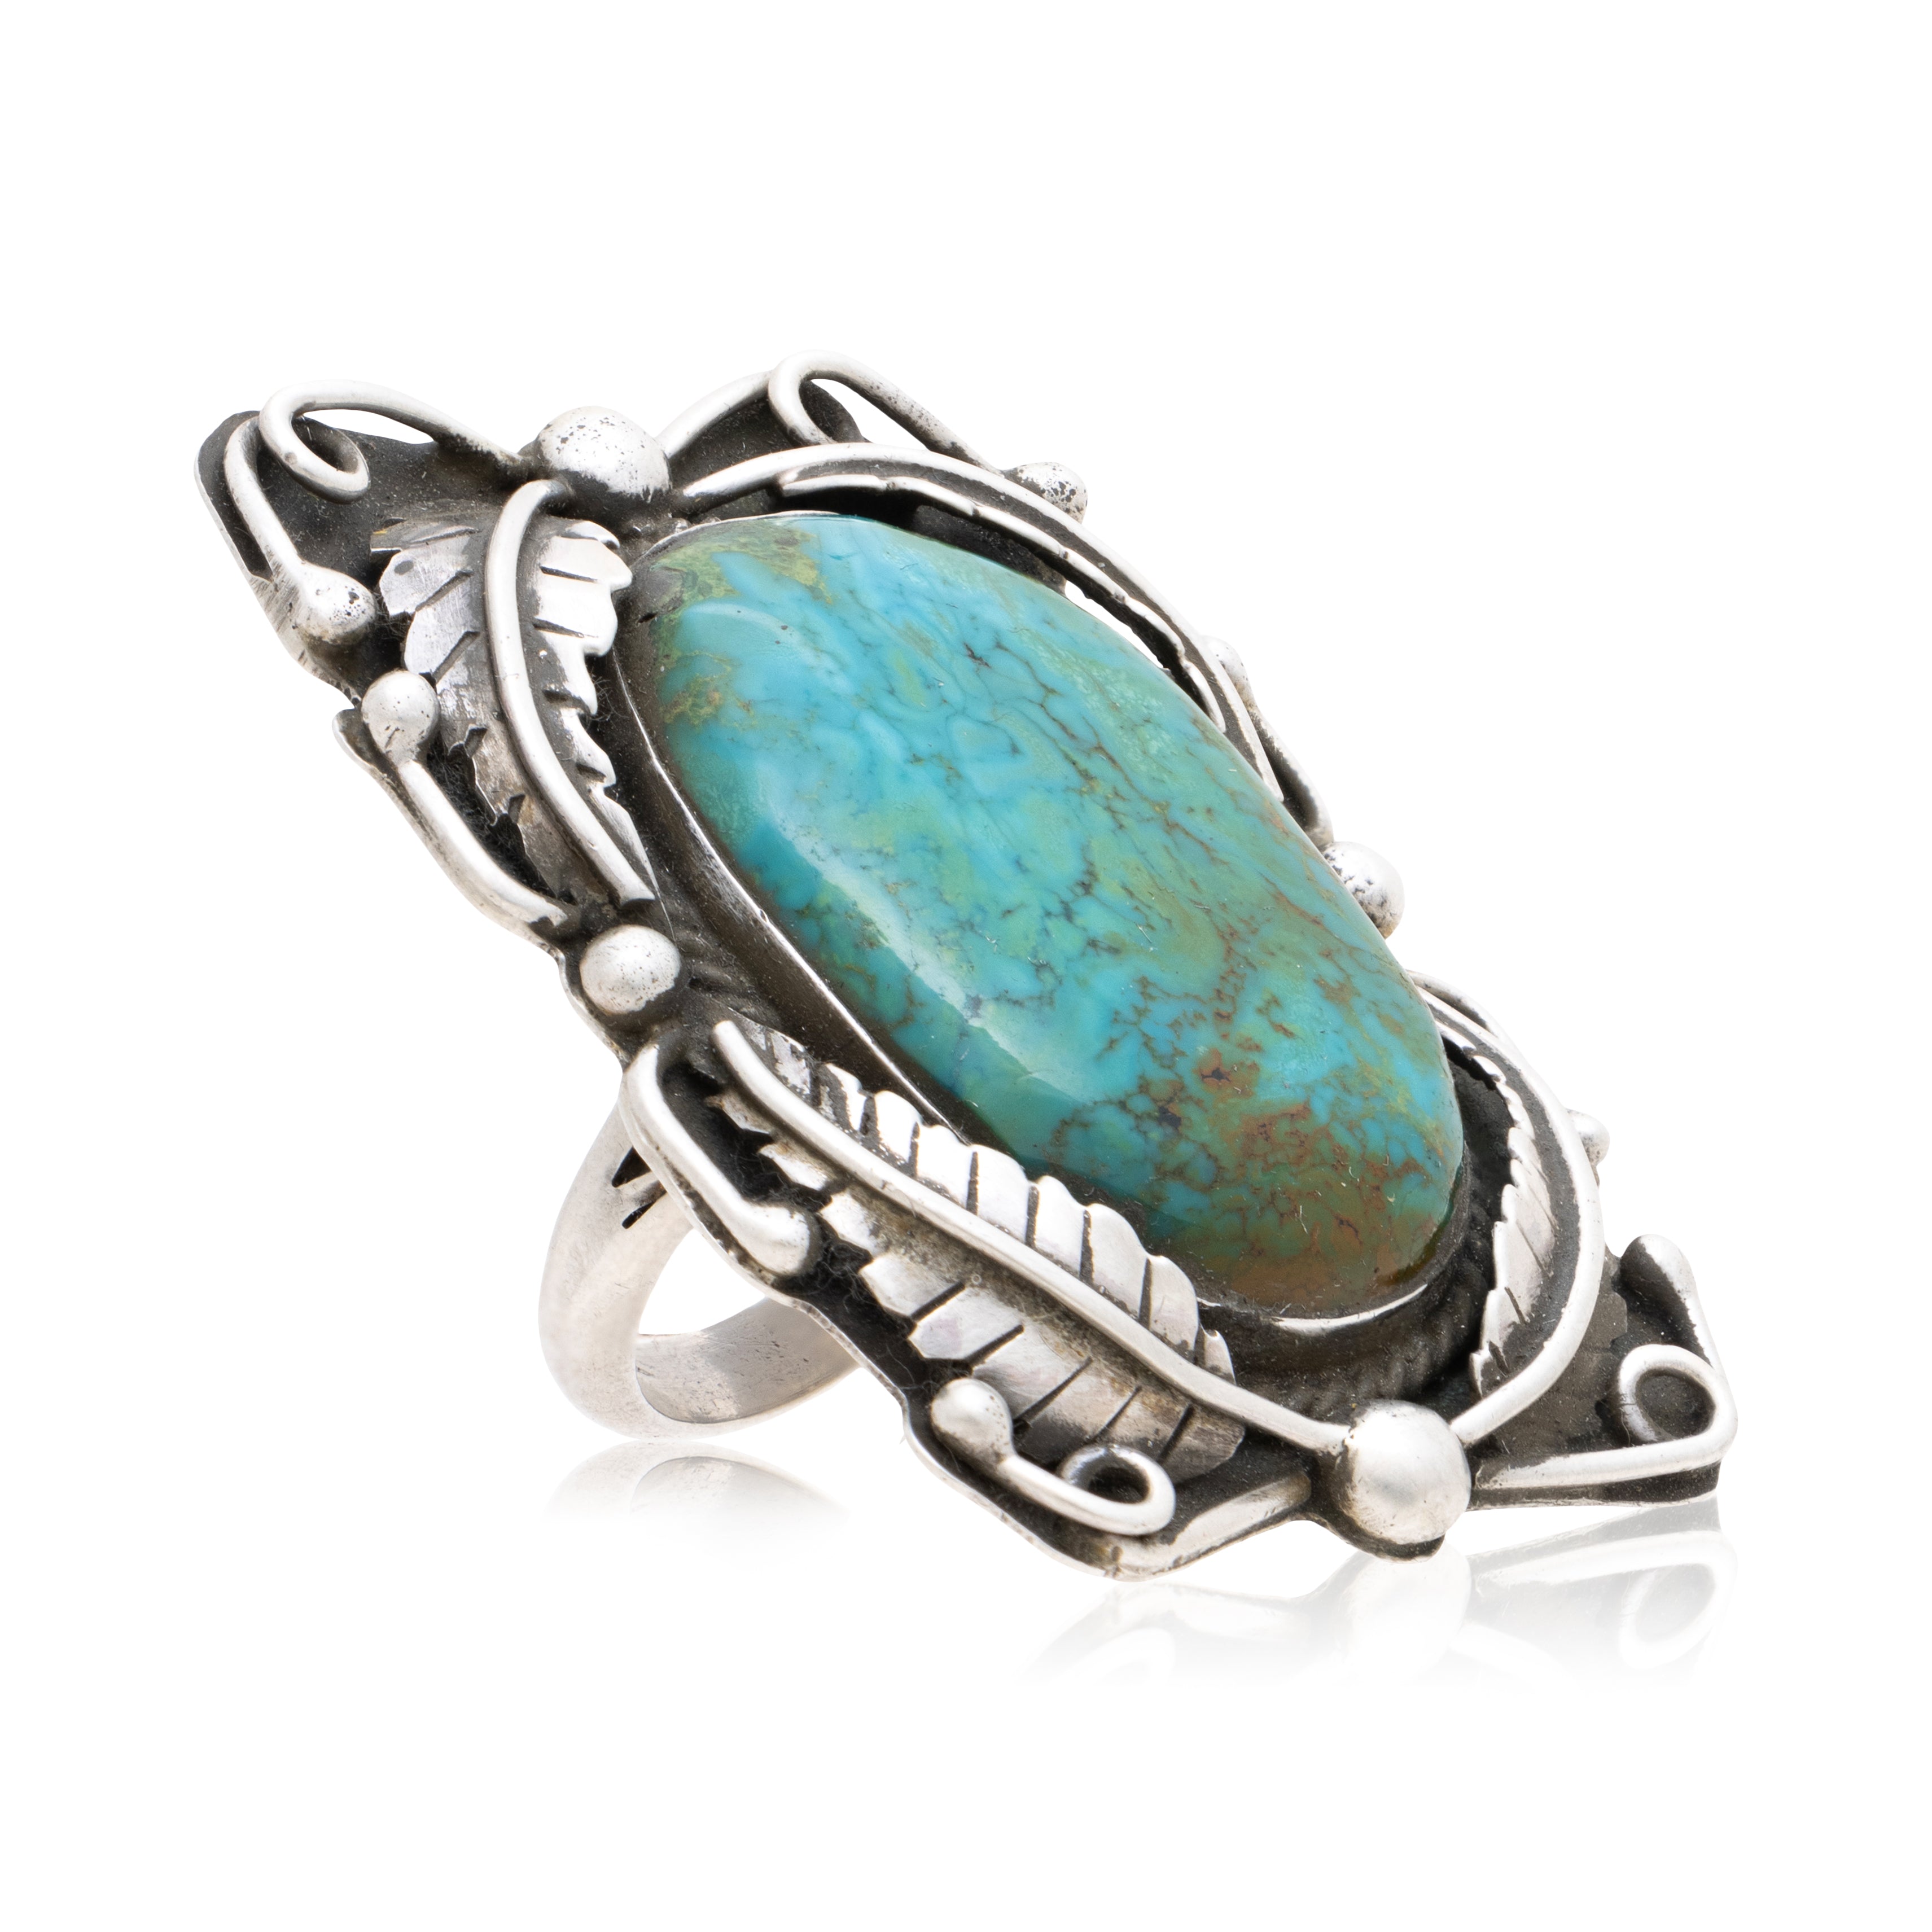 Large Navajo Turquoise Ring, Jewelry, Ring, Native